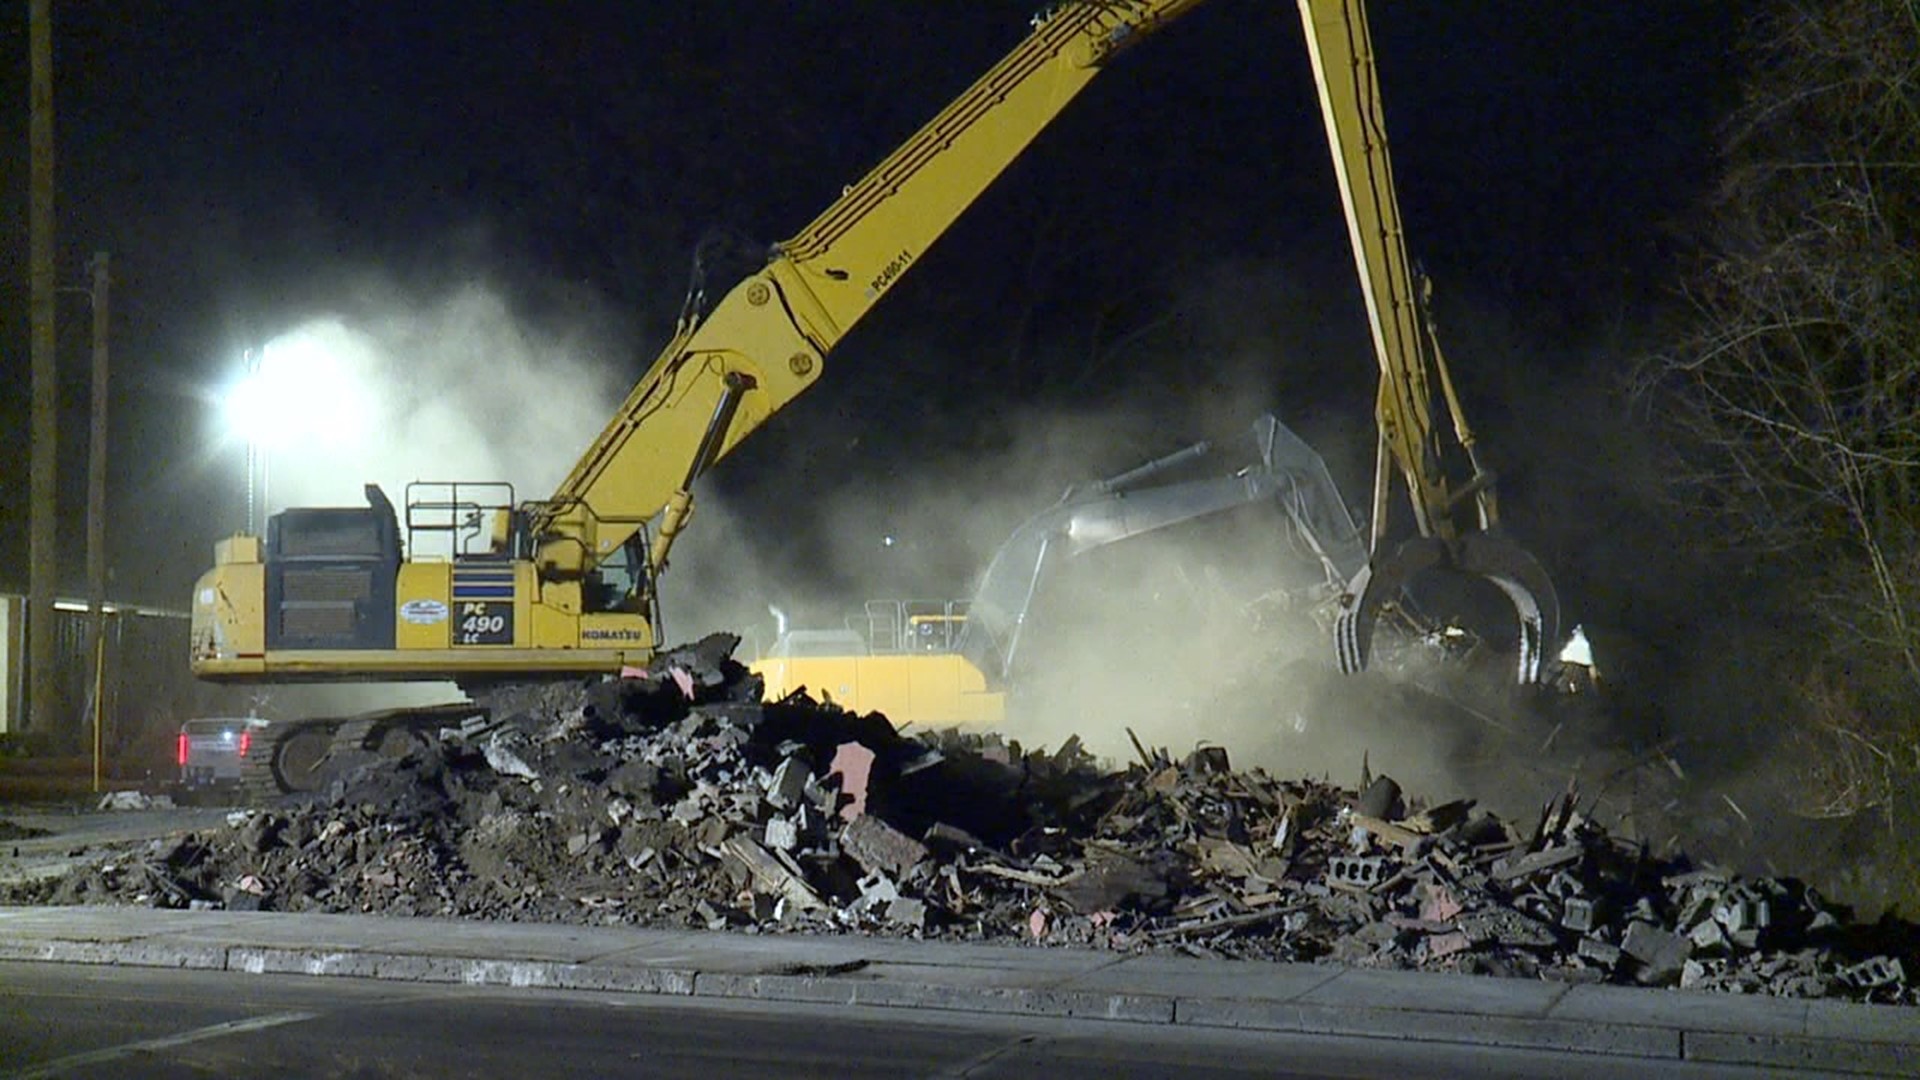 Crews closed it overnight to demolish the former Keen's Floral building.